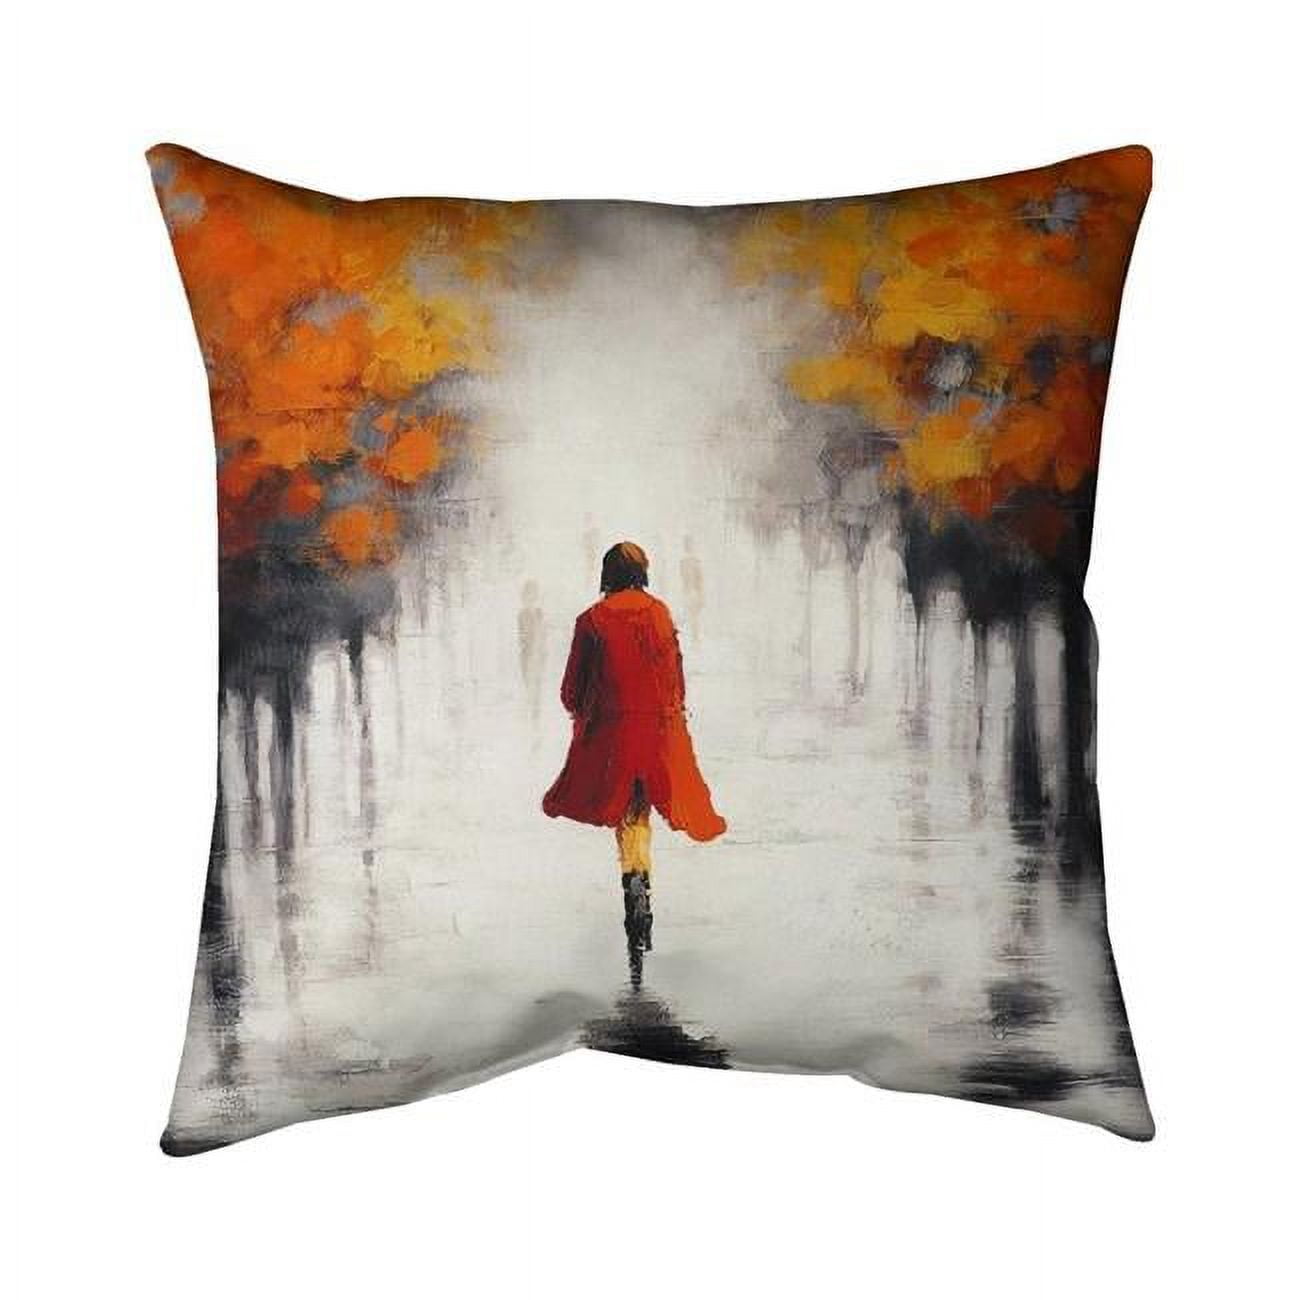 Fondo 20 x 20 in. Woman with A Red Coat by Fall-Double Sided Print Outdoor Pillow Cover